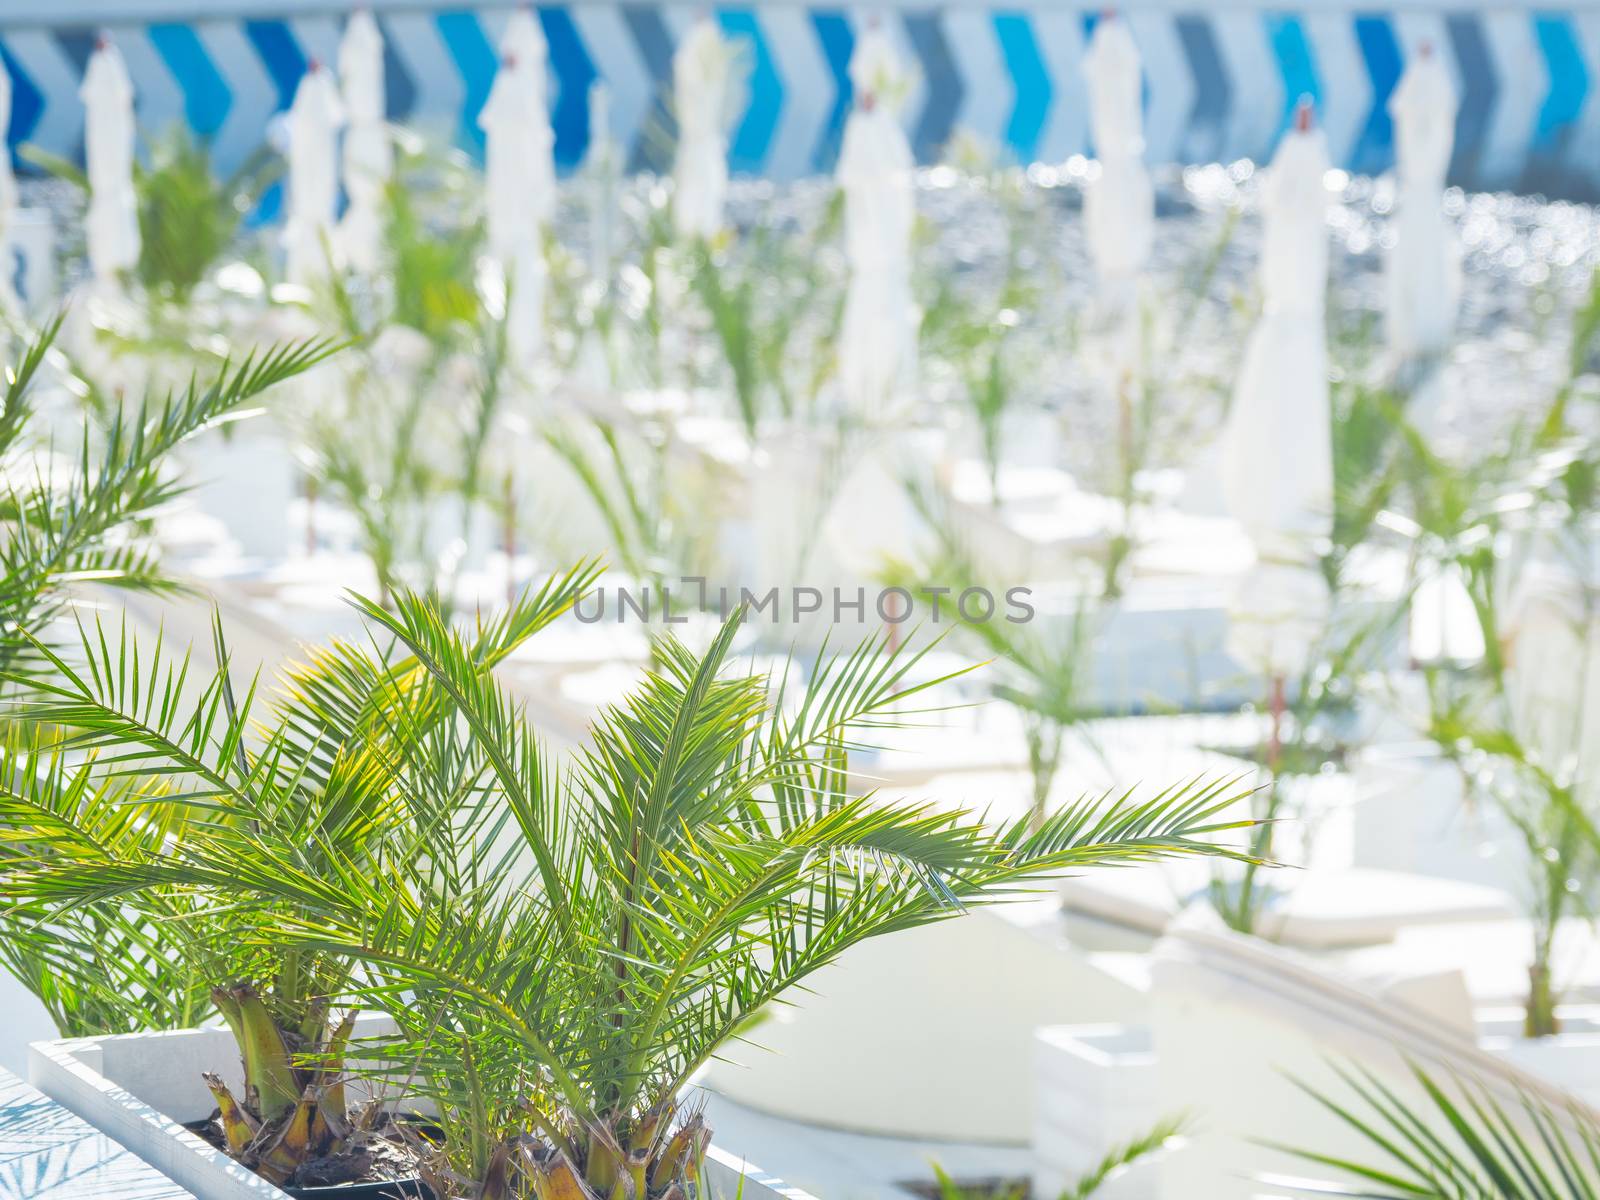 Mediterranean cafe. White furniture and sun umbrellas with palm trees in pots. Sunny day on beach.